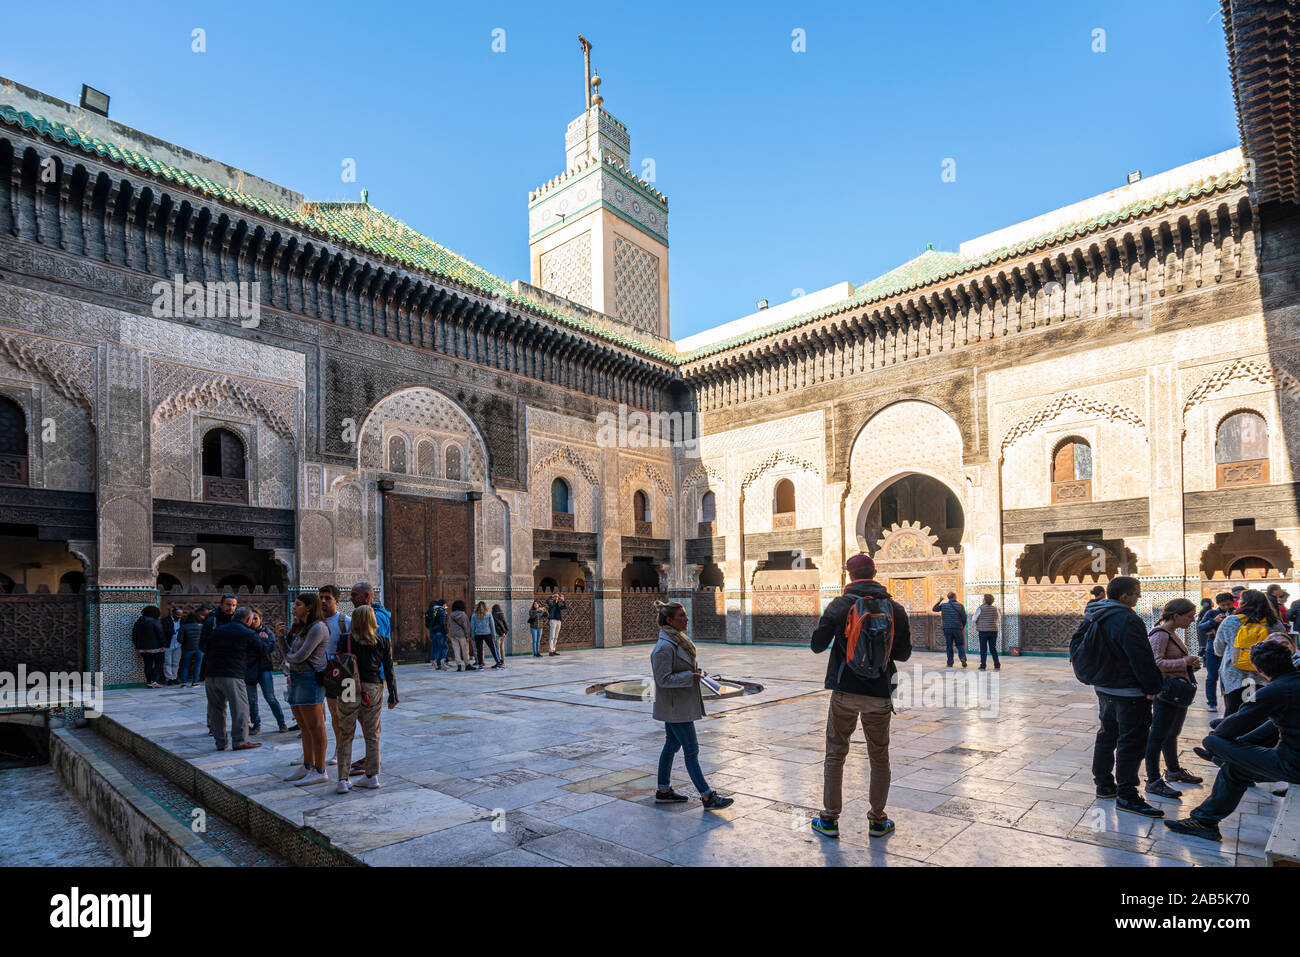 Fez, Morocco. November 9, 2019. Decorated courtyard in the Bou Inania madrasa building complex Stock Photo